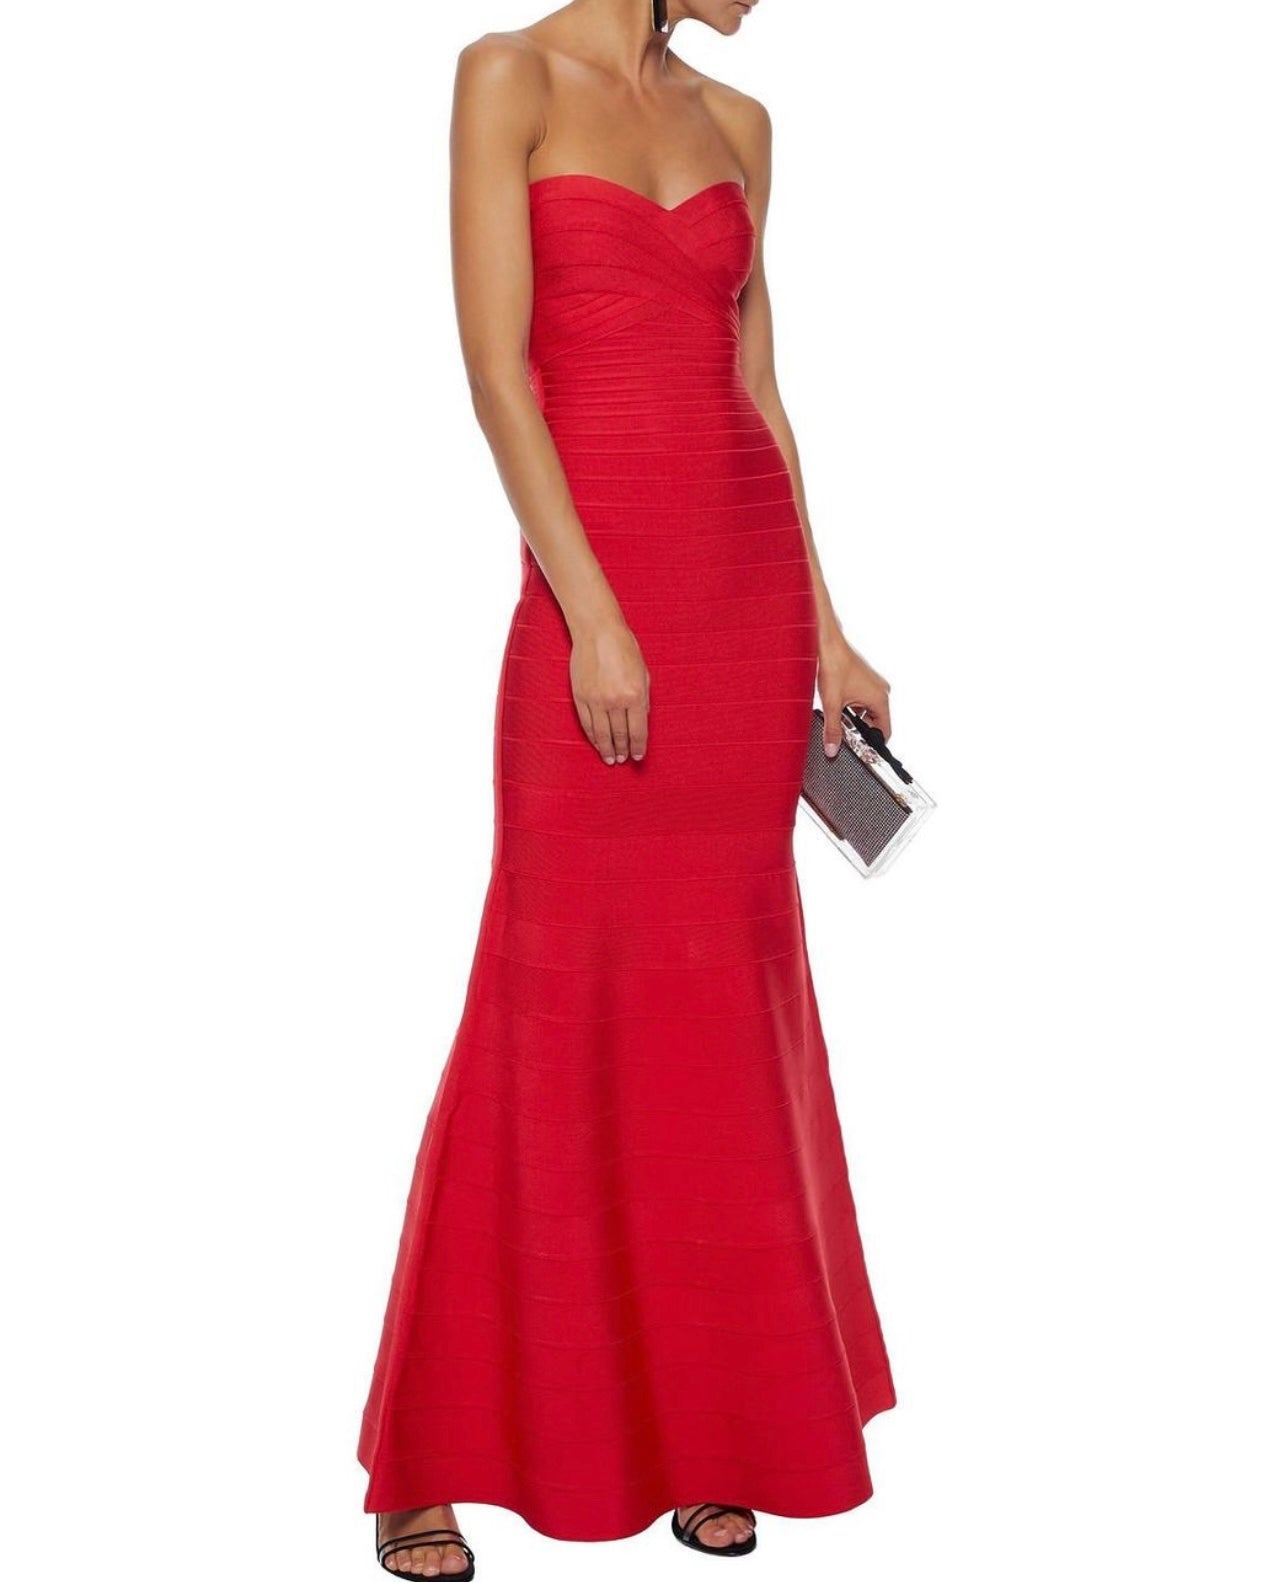 BRIGHT RED SARA GOWN